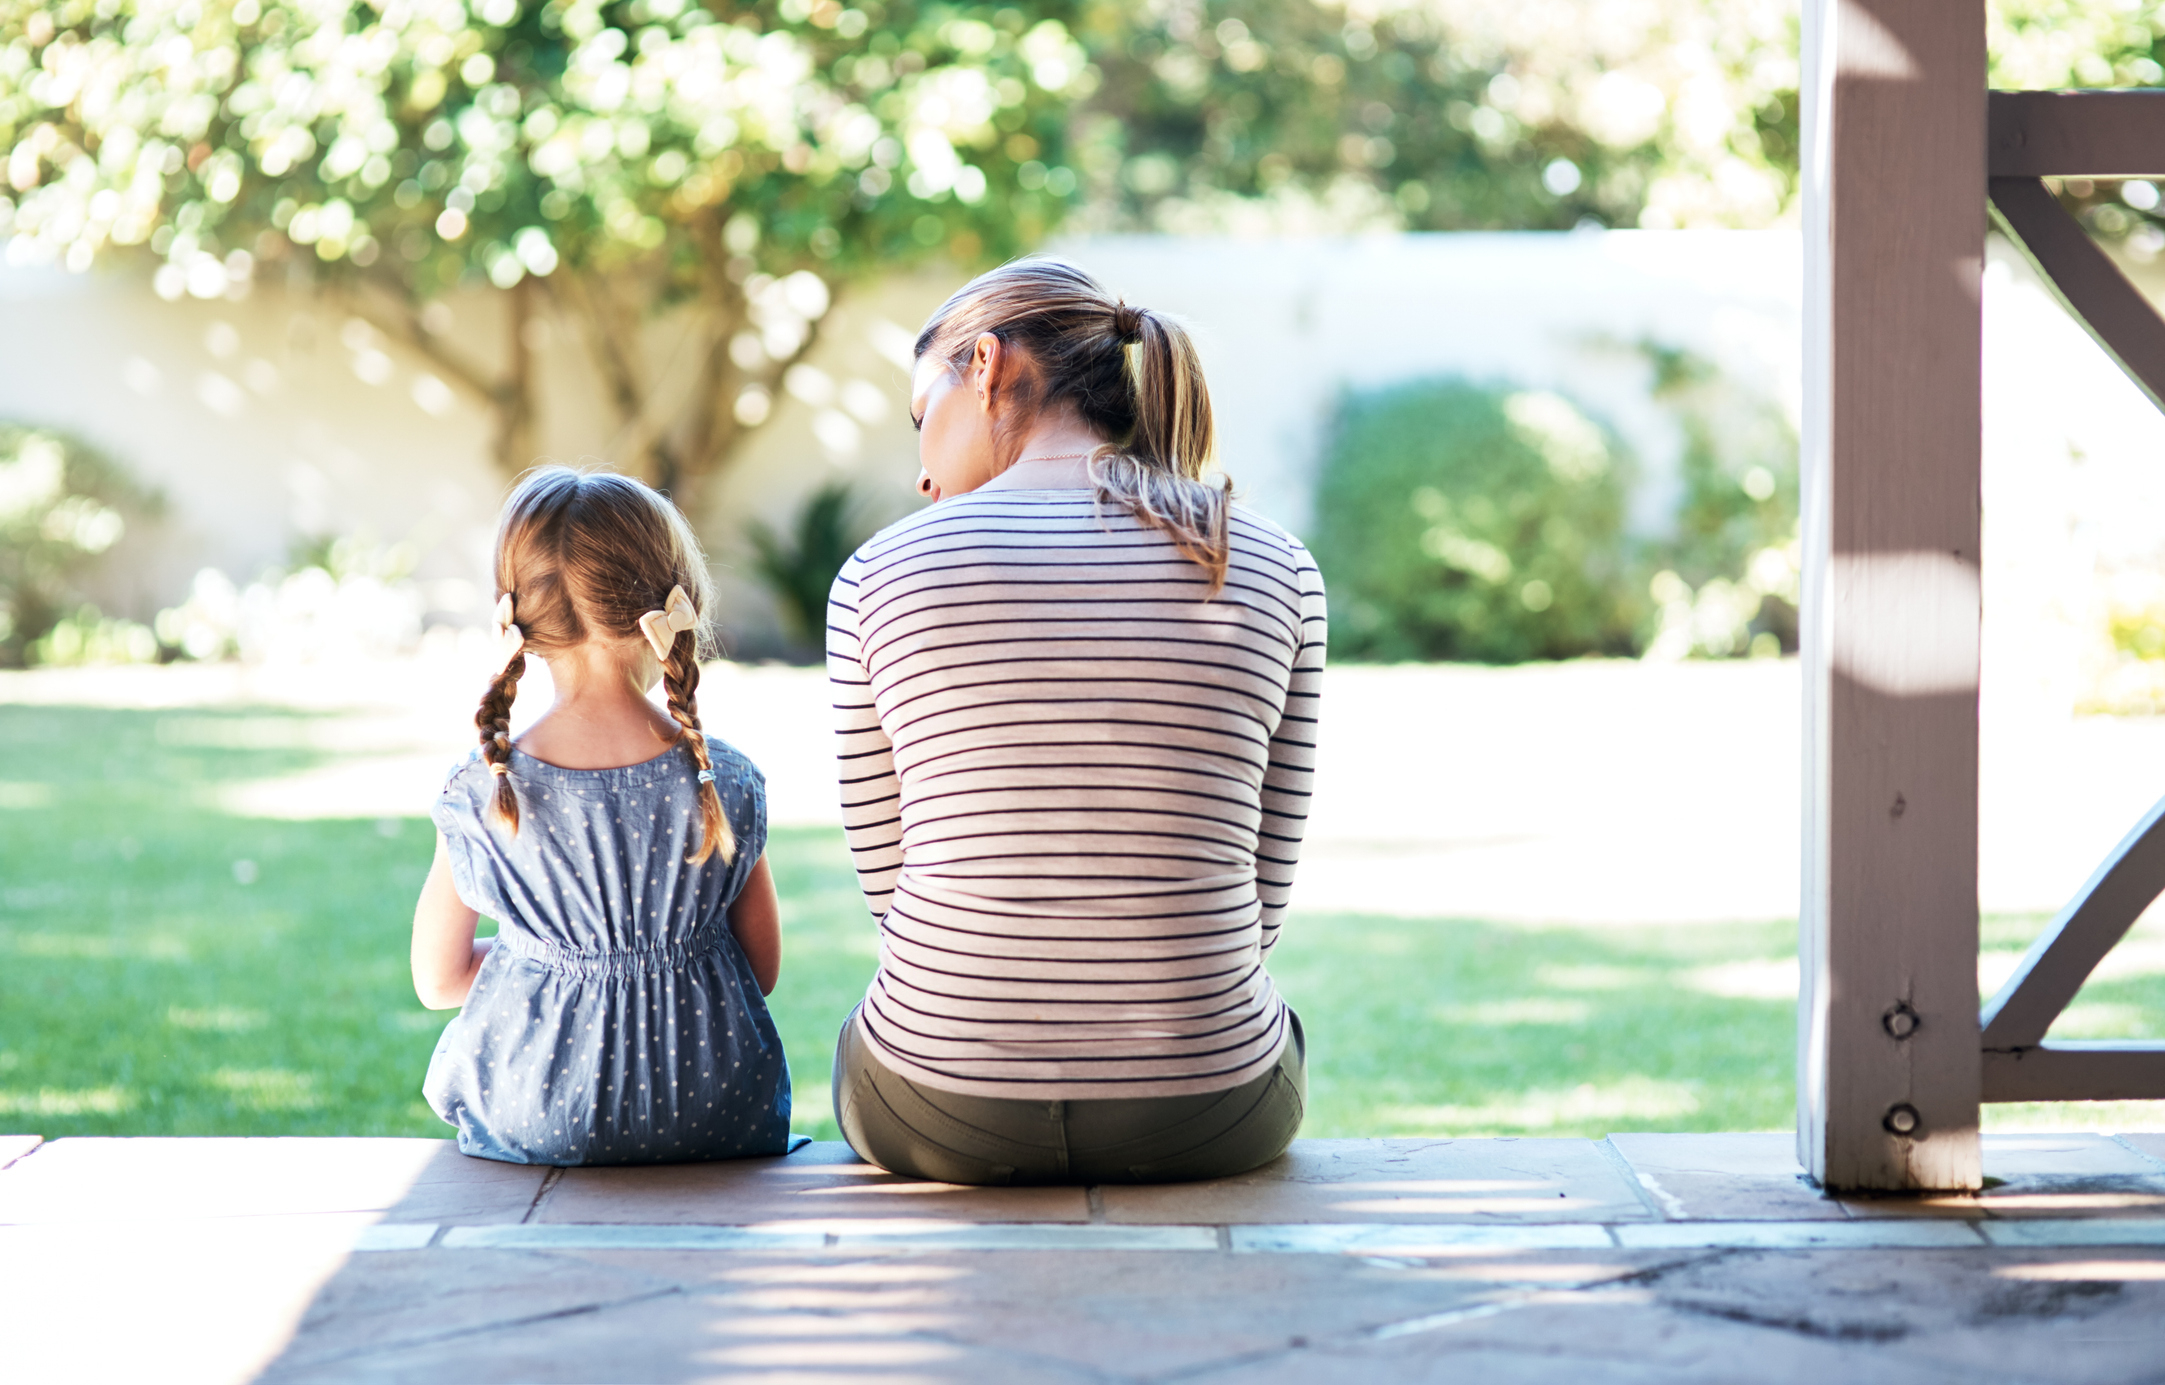 Adult and child sitting together outdoors, seen from behind, engaging in a conversation